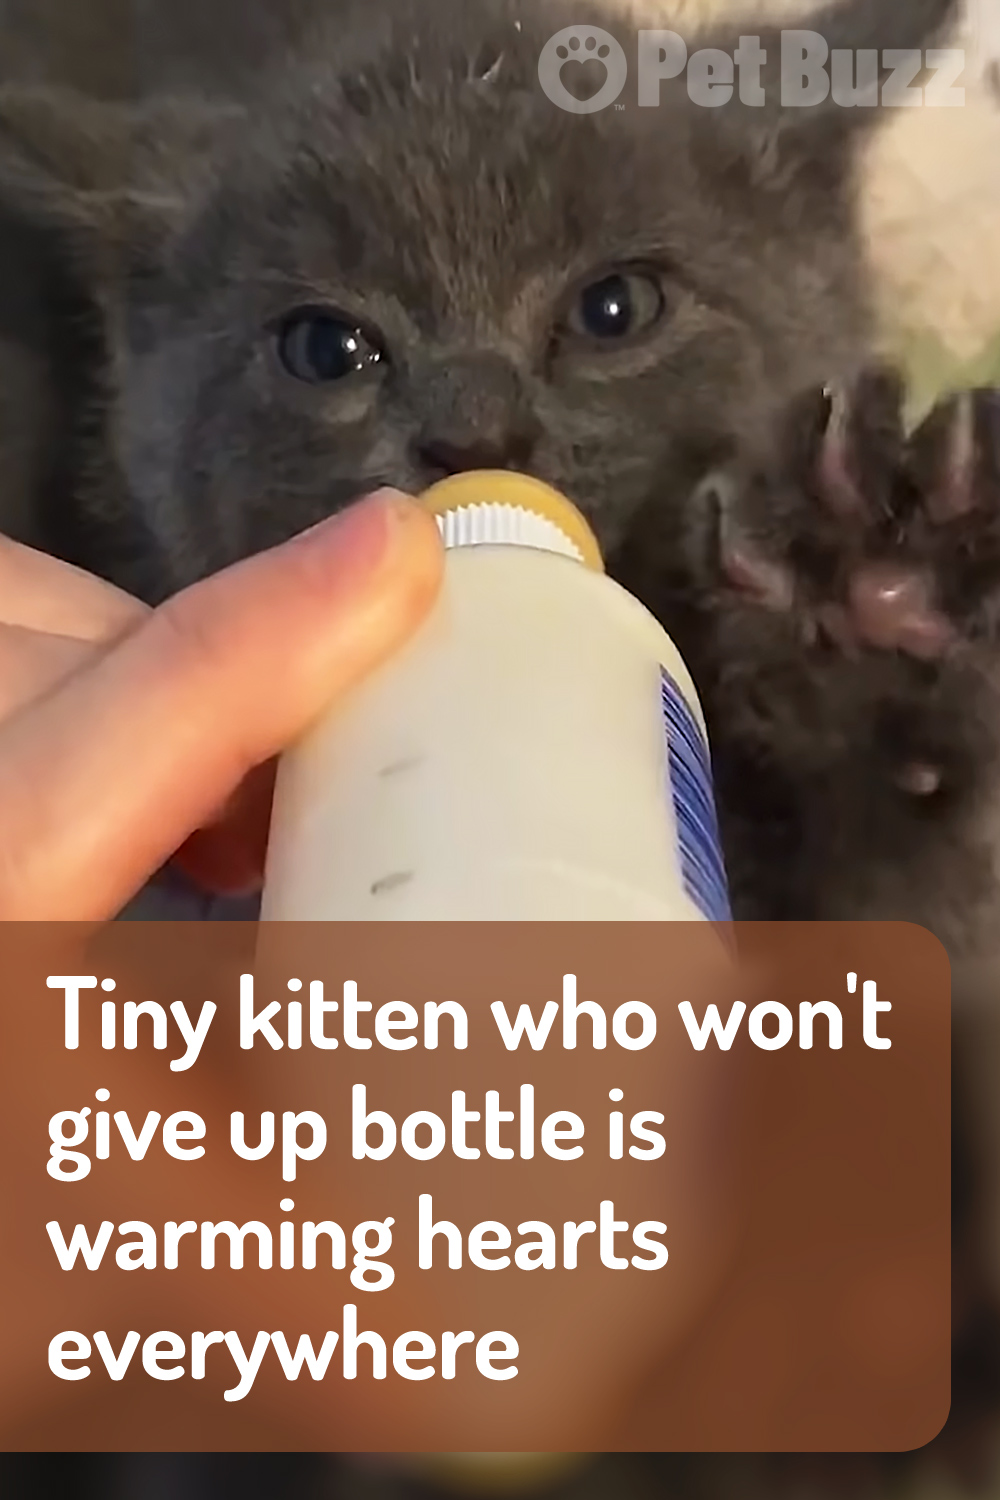 Tiny kitten who won’t give up bottle is warming hearts everywhere